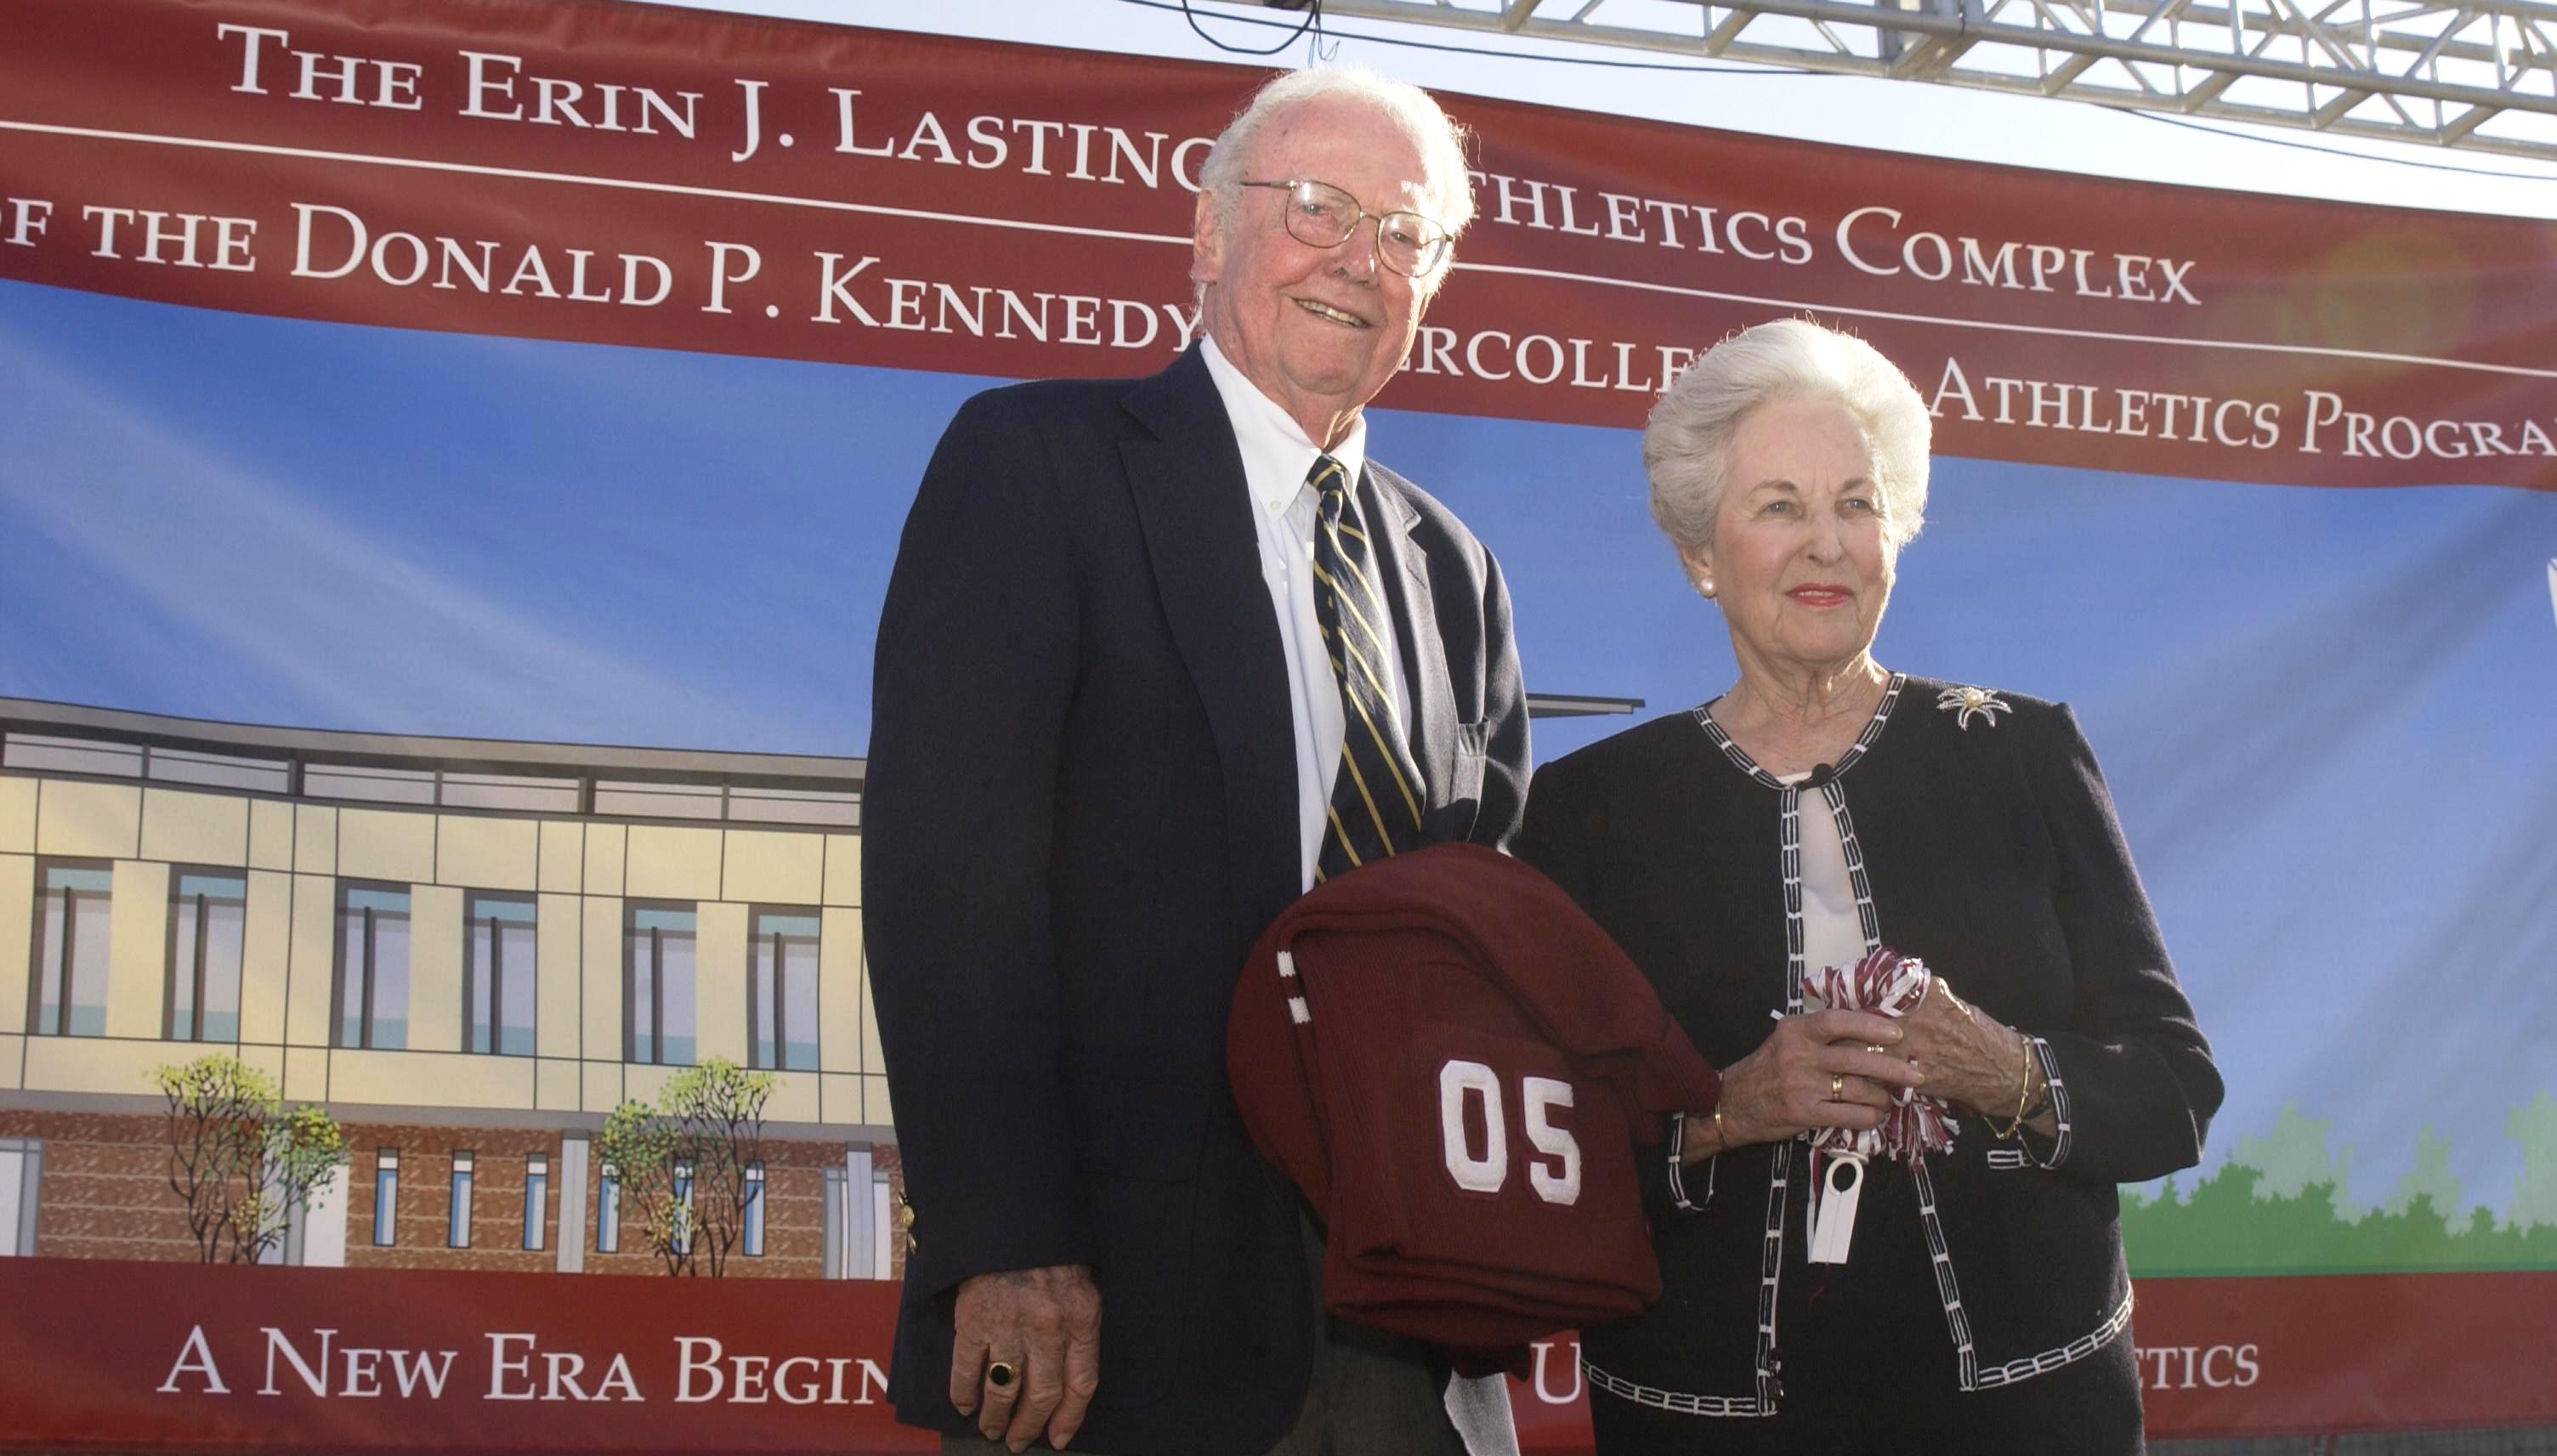 Donald P. Kennedy and his wife Dorothy, pictured in a 2008 file photo.